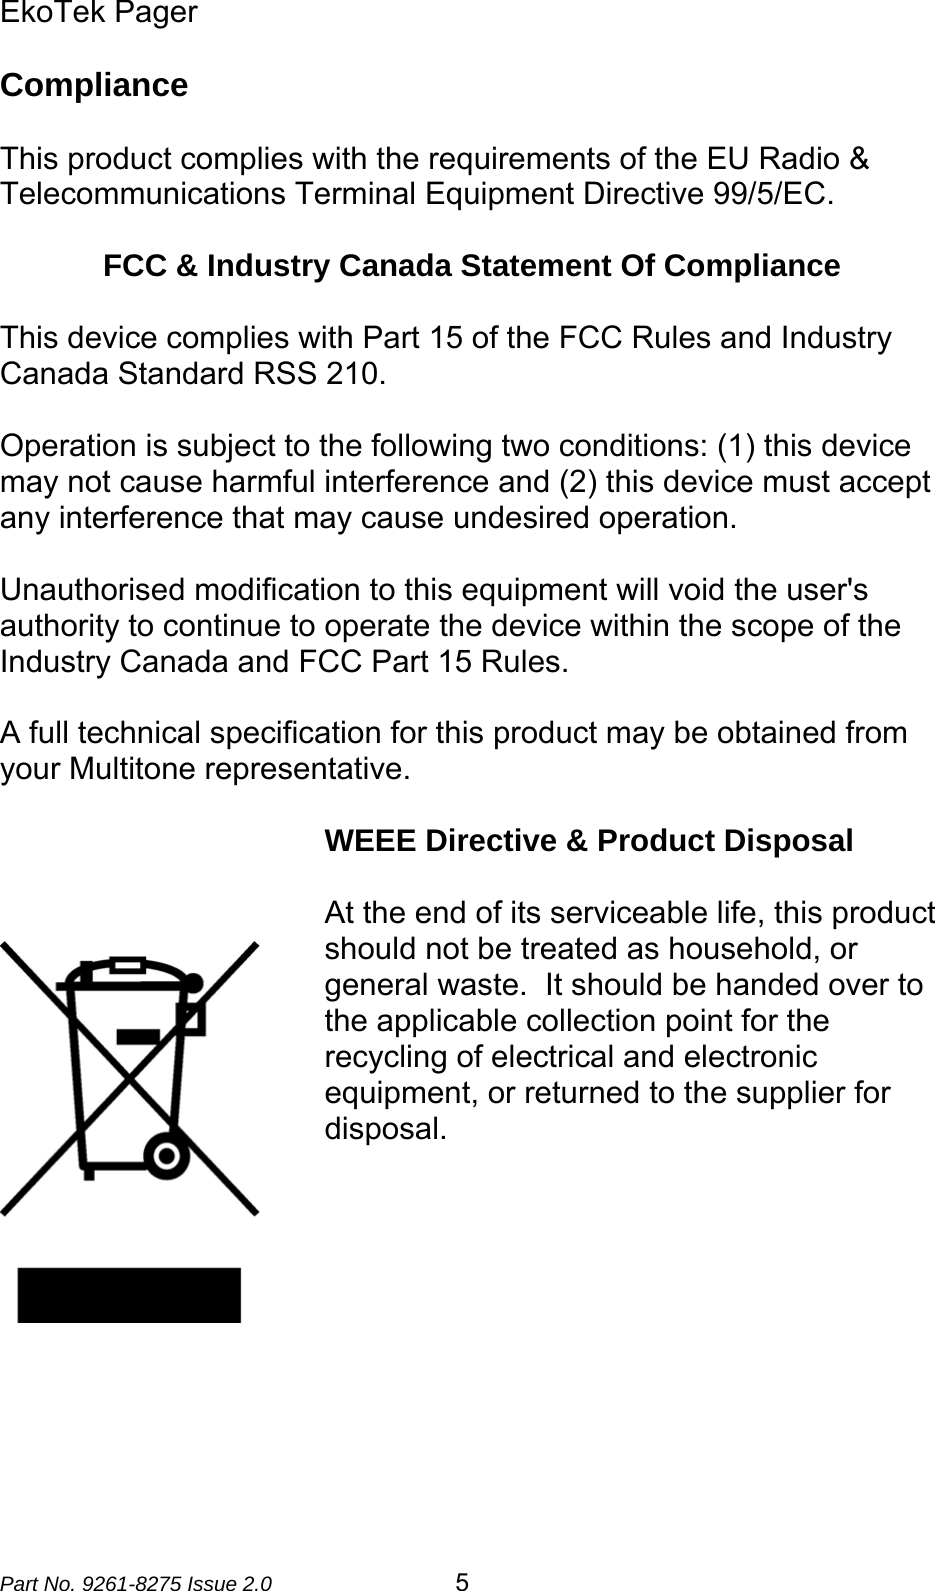 EkoTek Pager  Part No. 9261-8275 Issue 2.0  5 Compliance   This product complies with the requirements of the EU Radio &amp; Telecommunications Terminal Equipment Directive 99/5/EC.    FCC &amp; Industry Canada Statement Of Compliance  This device complies with Part 15 of the FCC Rules and Industry Canada Standard RSS 210.  Operation is subject to the following two conditions: (1) this device may not cause harmful interference and (2) this device must accept any interference that may cause undesired operation.  Unauthorised modification to this equipment will void the user&apos;s authority to continue to operate the device within the scope of the Industry Canada and FCC Part 15 Rules.  A full technical specification for this product may be obtained from your Multitone representative.  WEEE Directive &amp; Product Disposal   At the end of its serviceable life, this product should not be treated as household, or general waste.  It should be handed over to the applicable collection point for the recycling of electrical and electronic equipment, or returned to the supplier for disposal.    